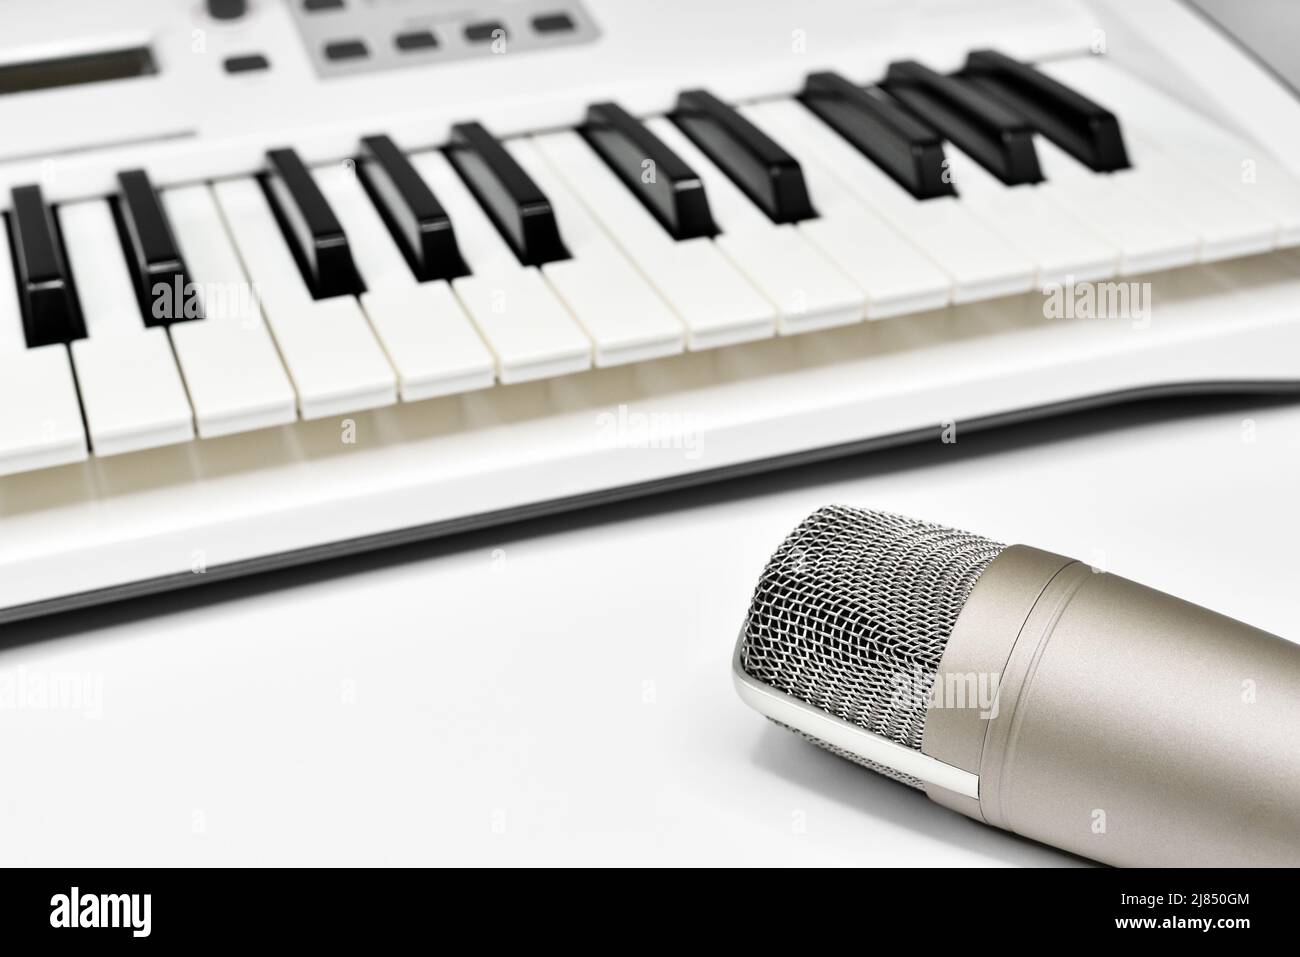 Professional studio microphone against blurred synthesizer keyboard background. Professional studio gear for voice and music recording. Stock Photo